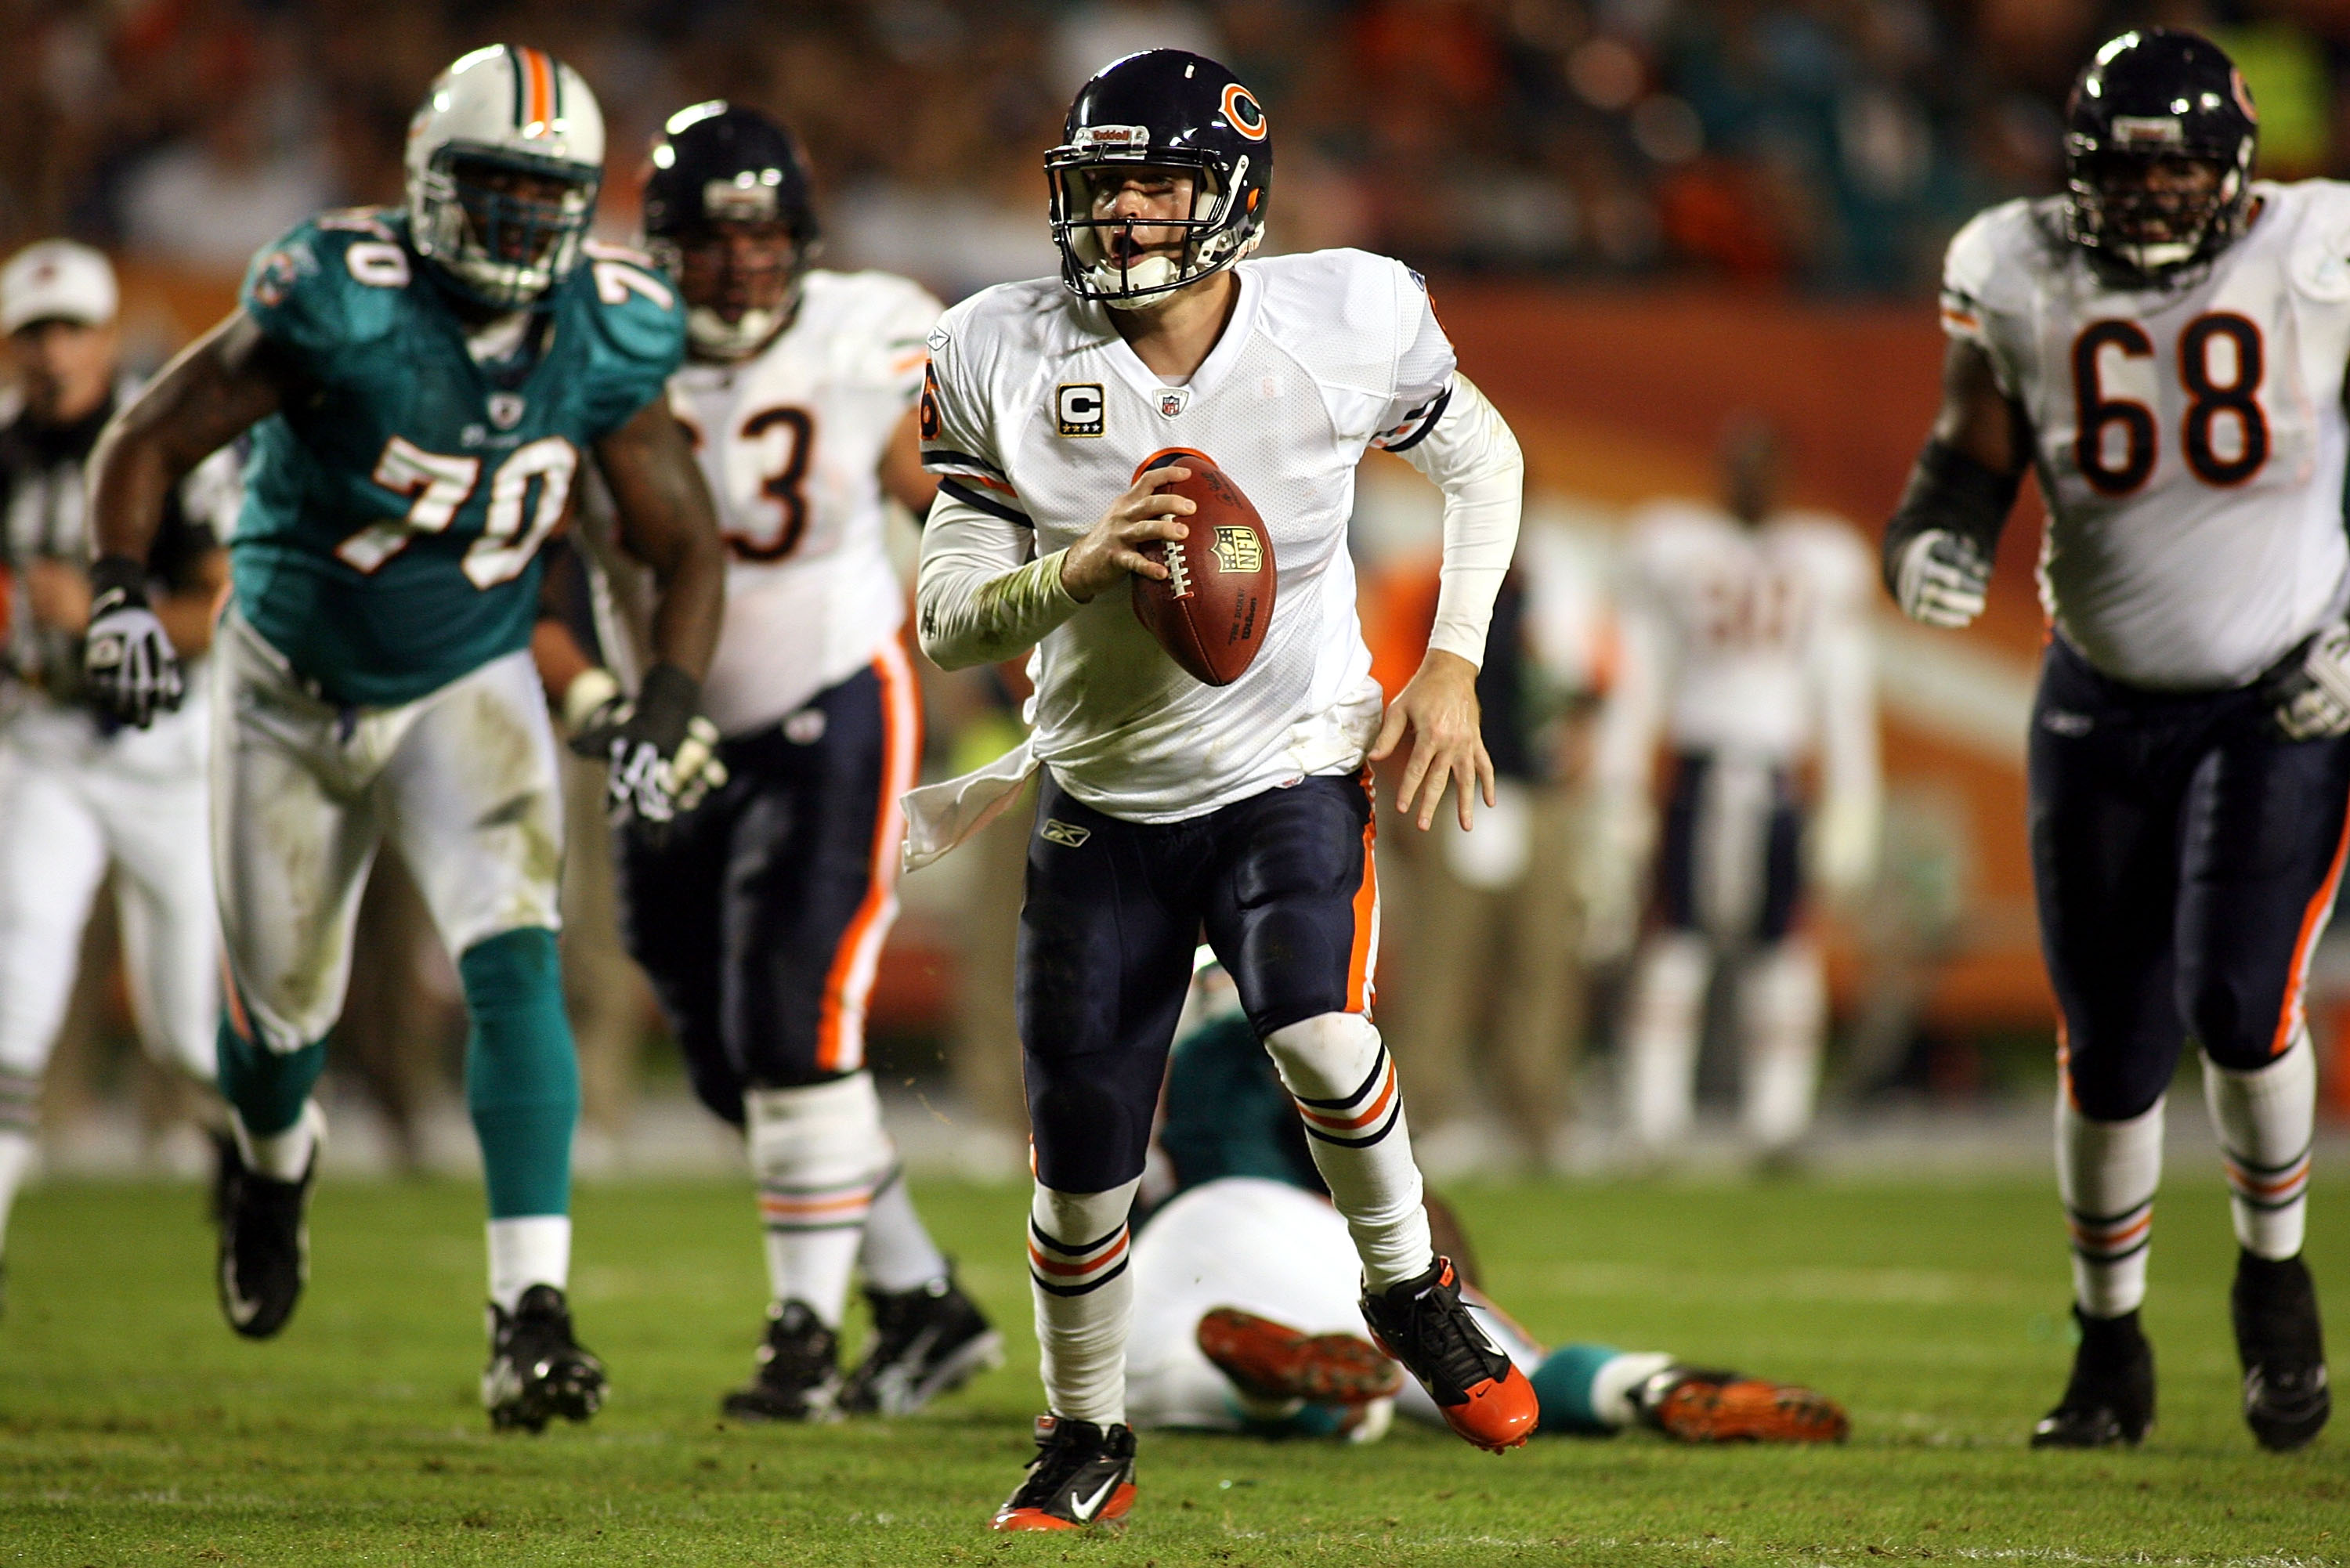 Miami Dolphins vs. Chicago Bears highlights